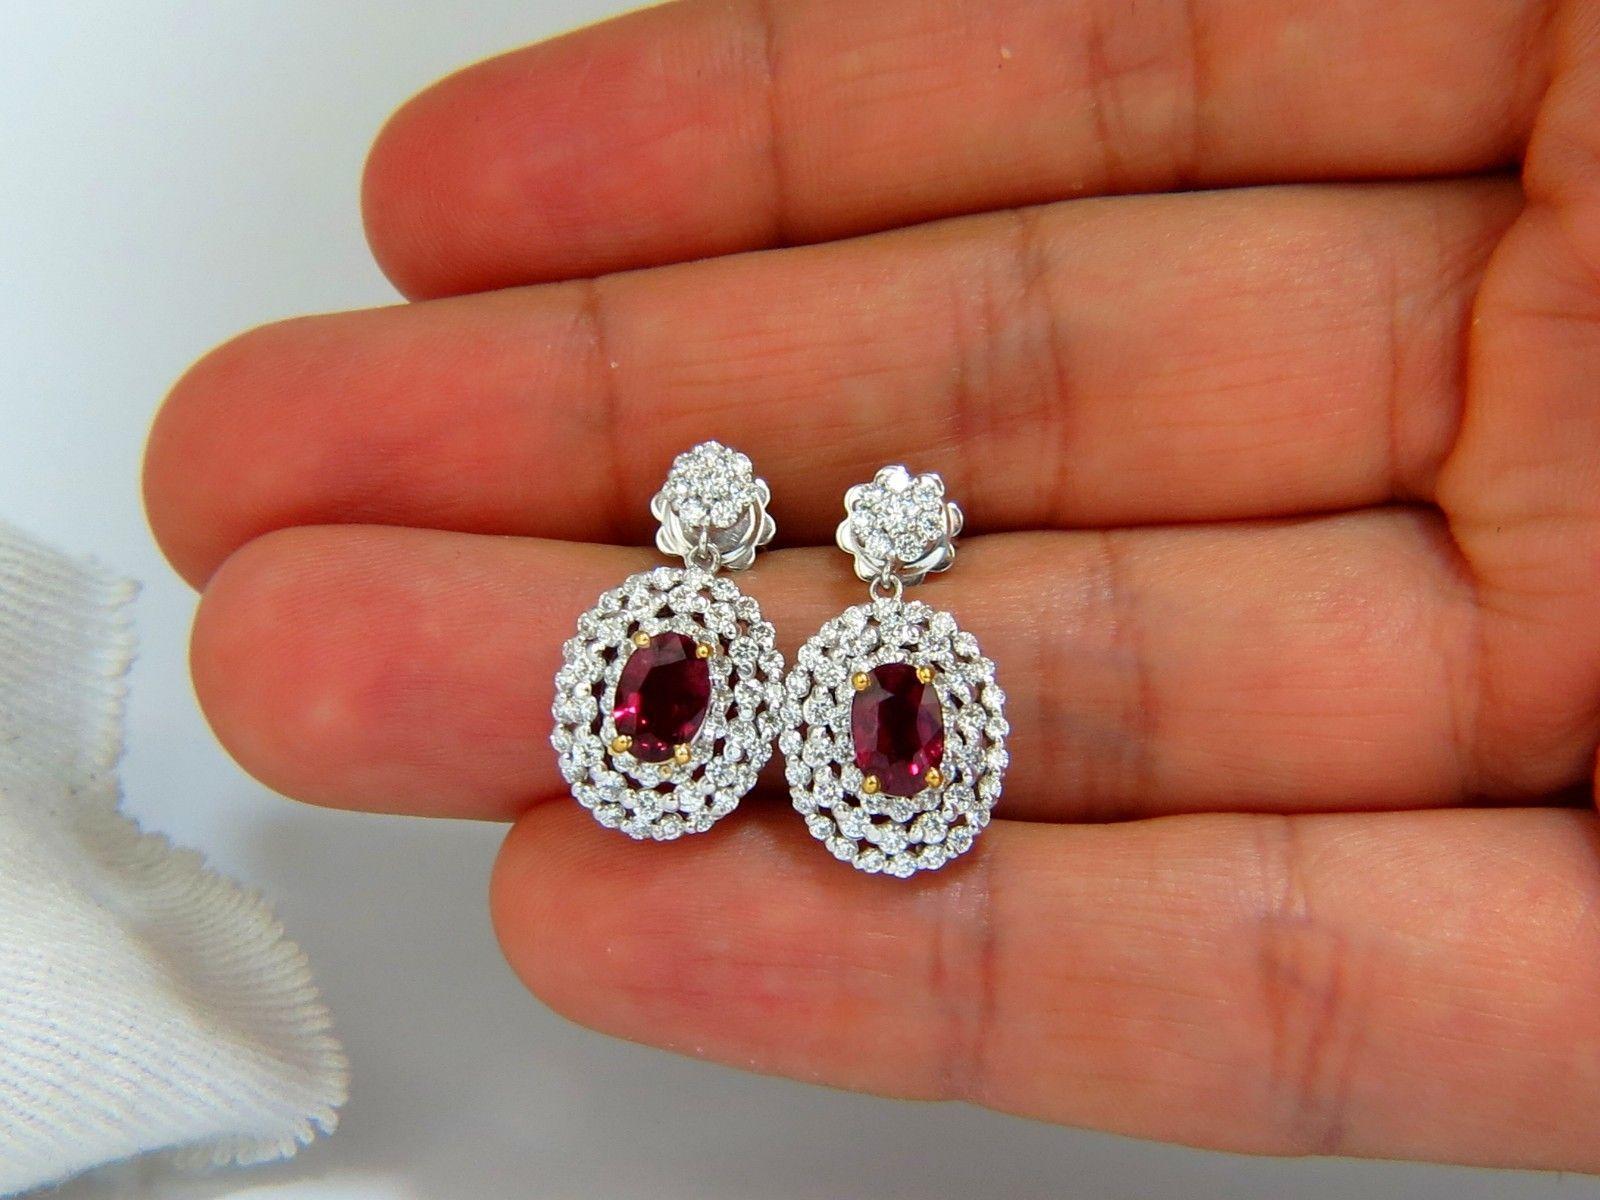 Ruby dangle cluster earrings.

1.86ct natural oval red rubies 

Clean Clarity & Transparent

6.8 X 4.9mm each

1.60ct. Natural diamonds  

Rounds, Full cut brilliants.

G- color Vs-2 Clarity. 

Secure push backs

Excellent detail.

14kt. white